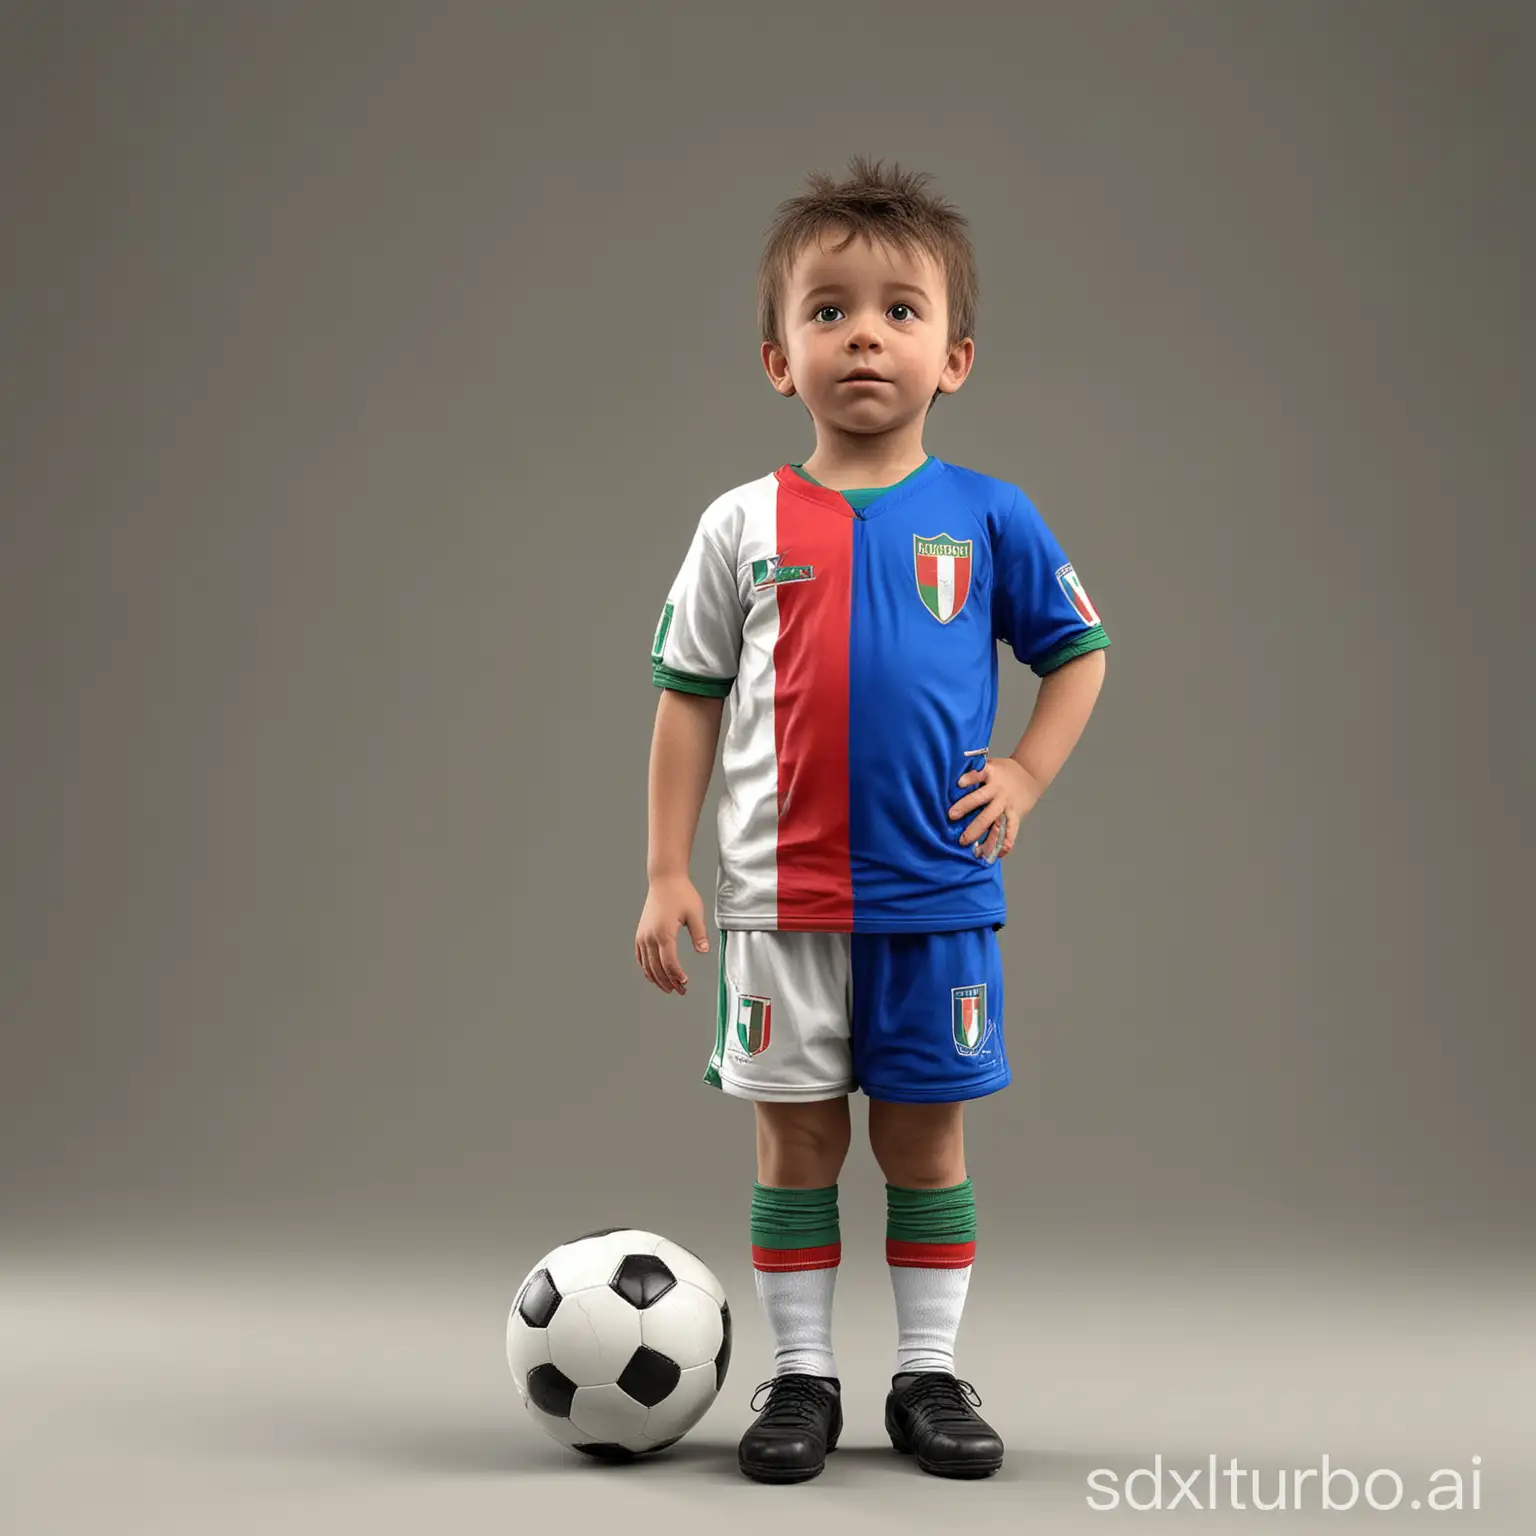 Little child del piero wearing italy soccer jersey, game character, stands at full height